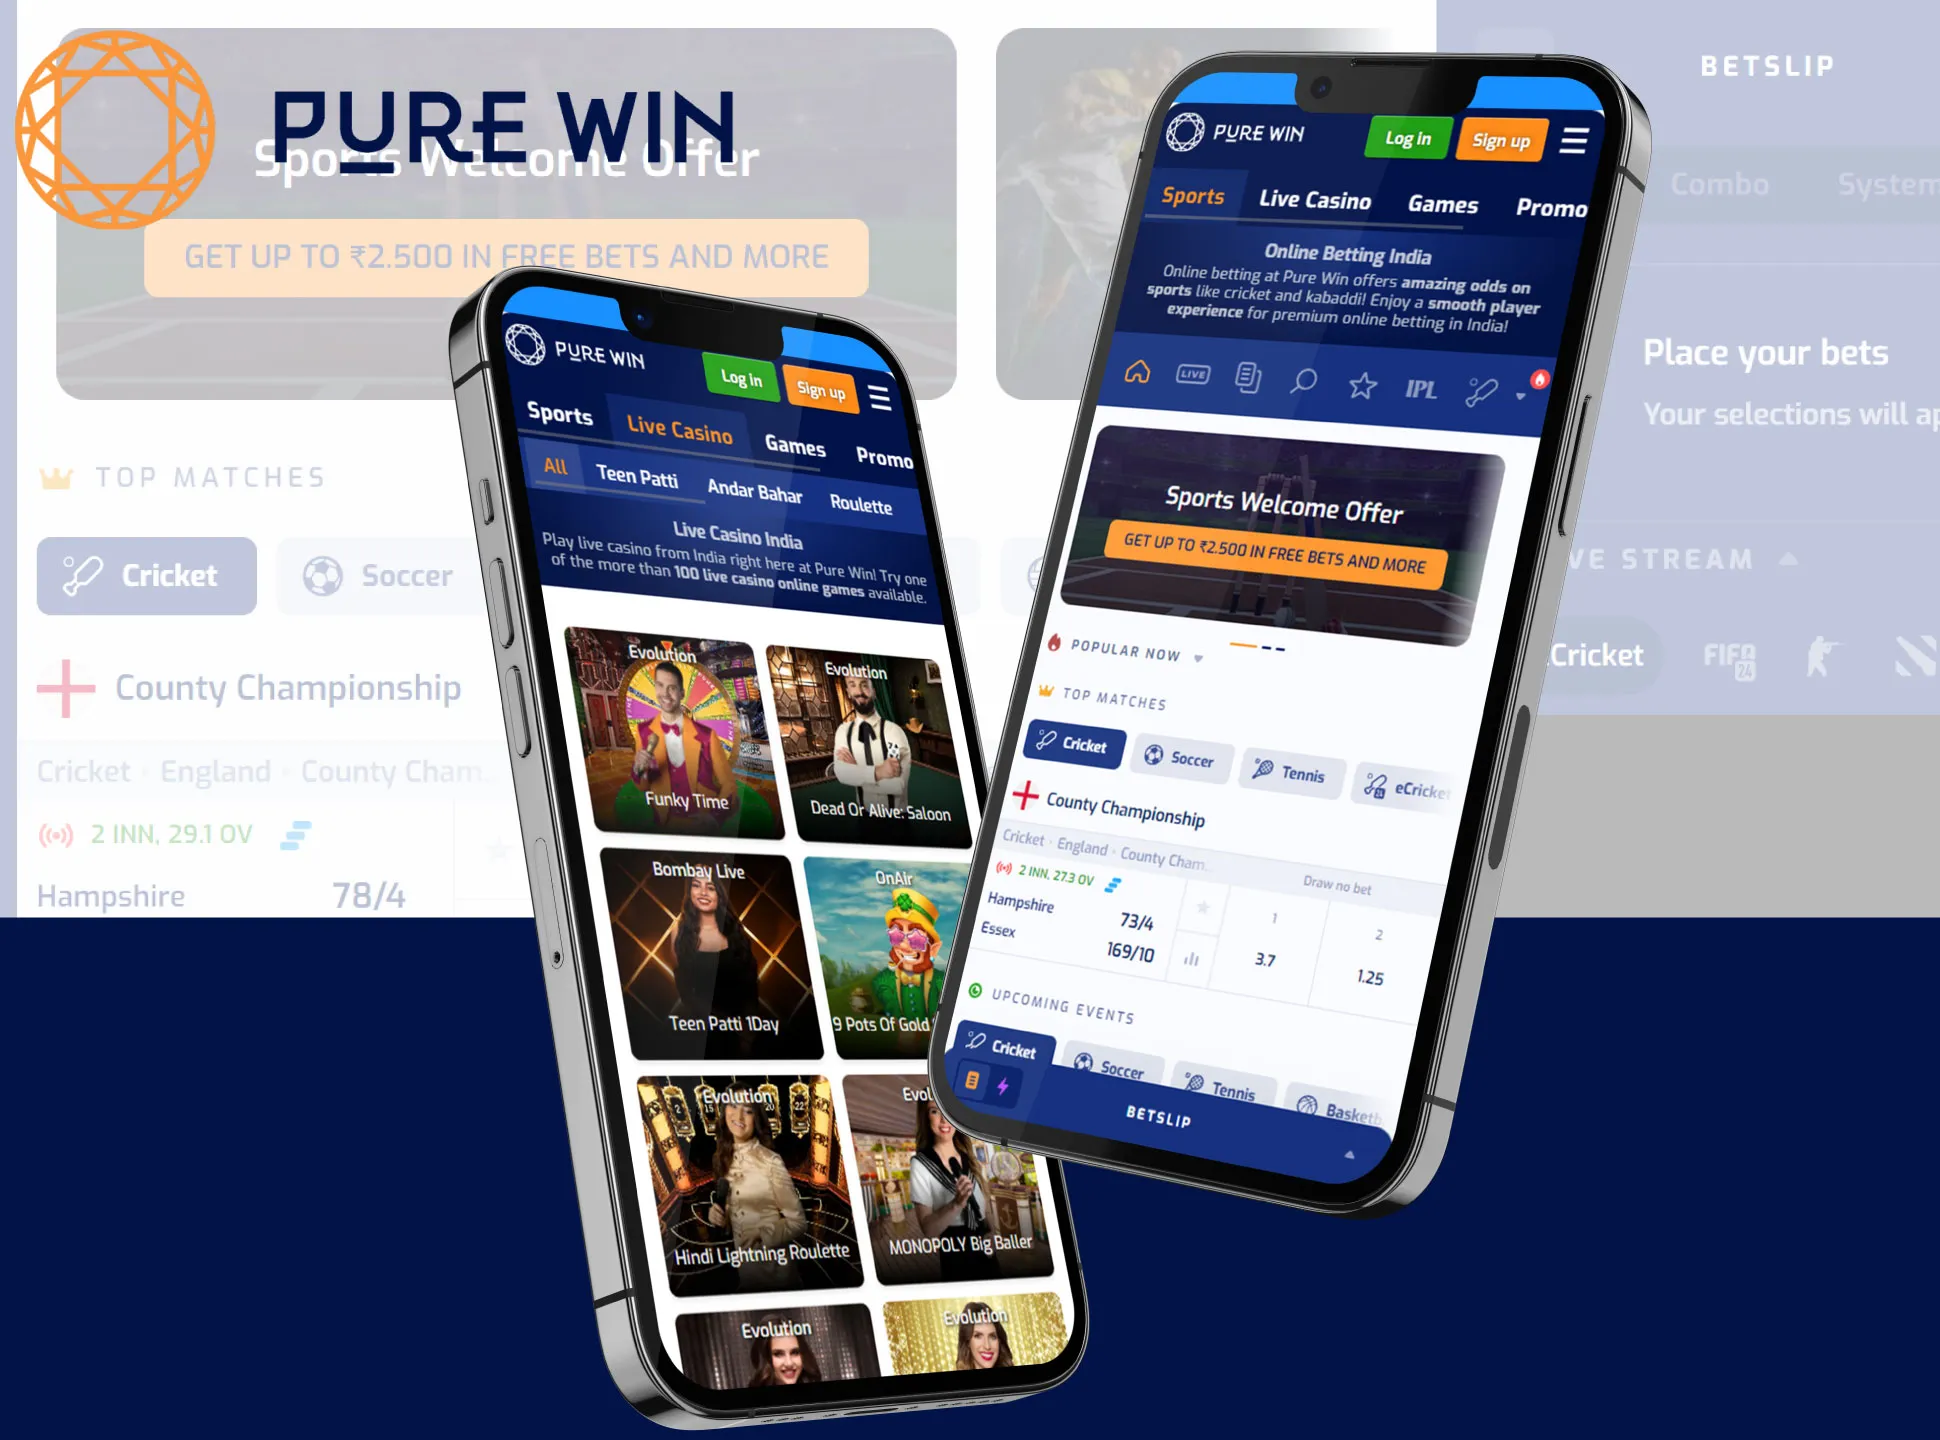 You can use the Pure Win mobile version without installing the app.